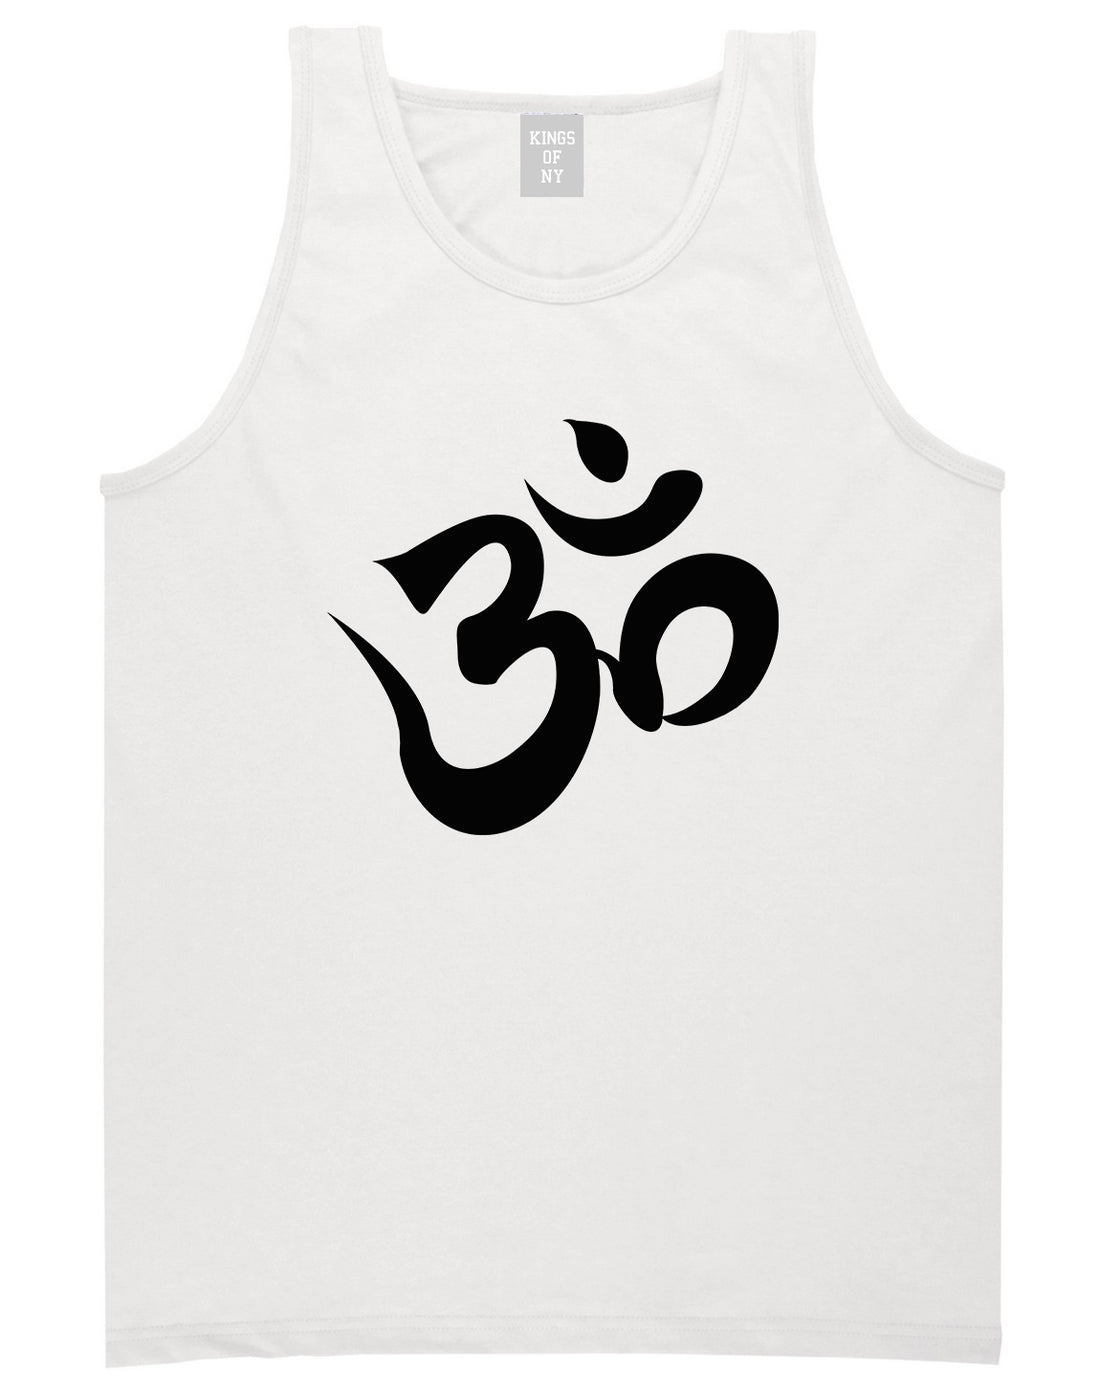 Om Ohm Symbol White Tank Top Shirt by Kings Of NY